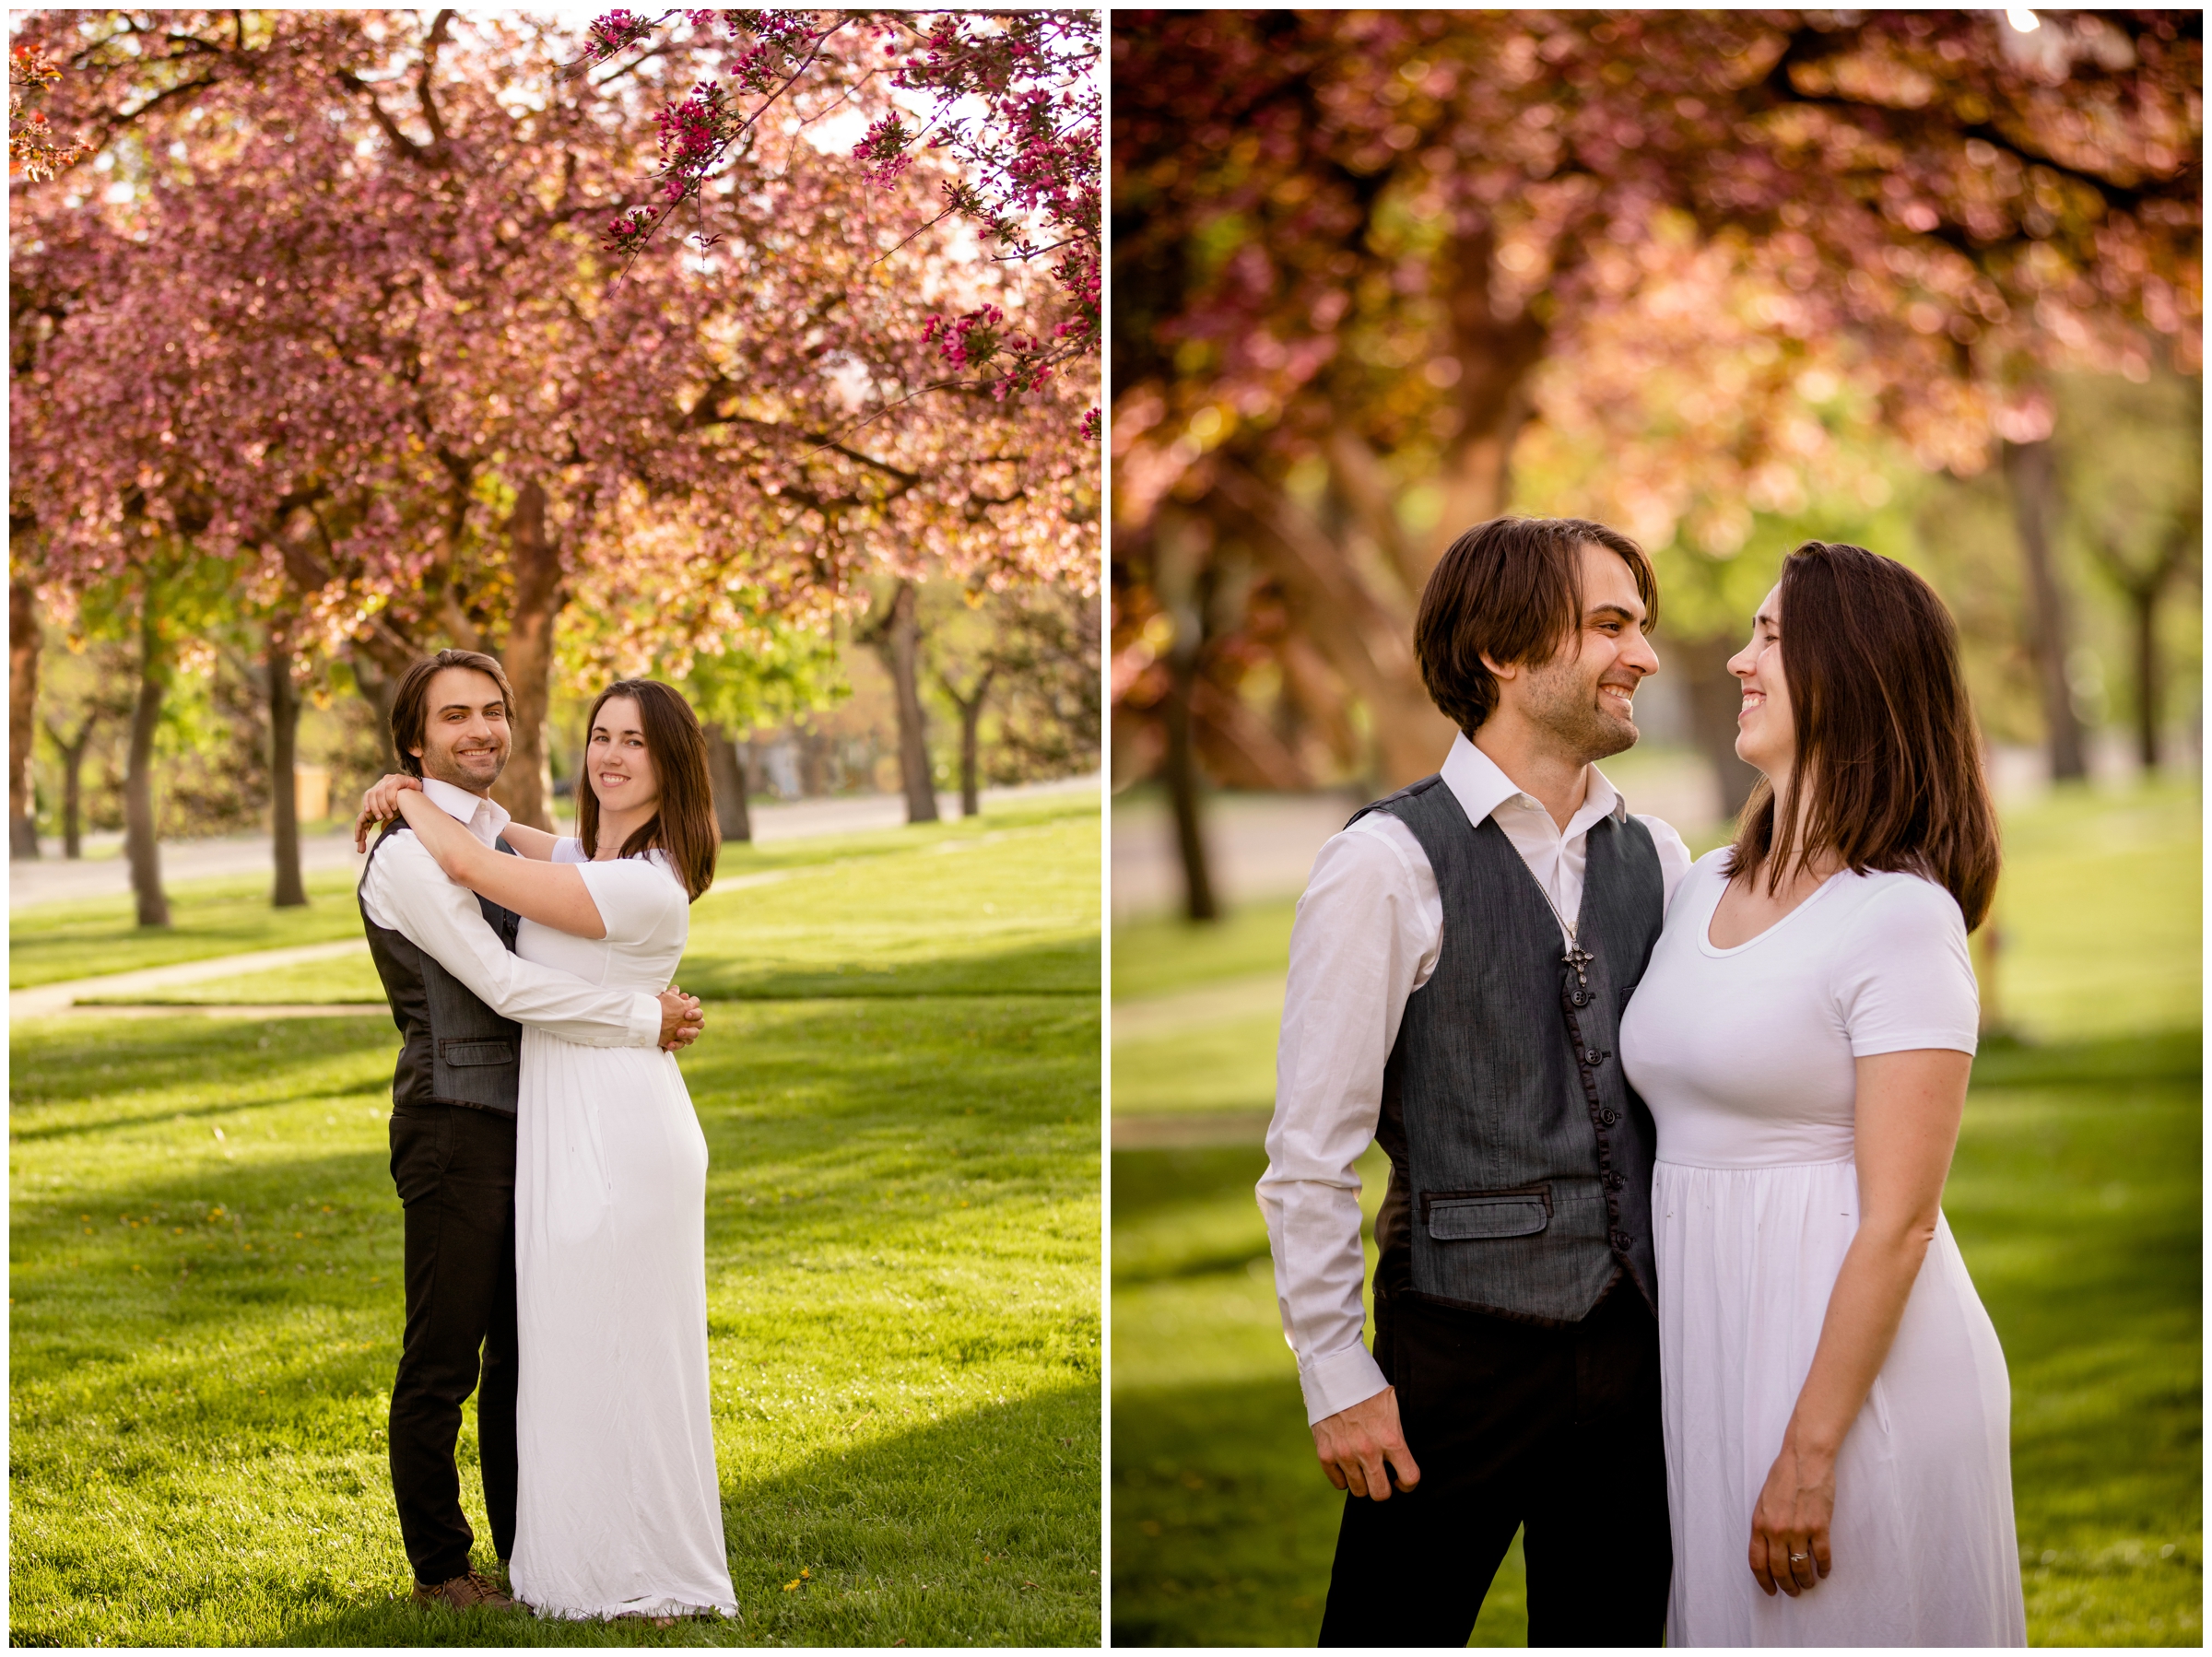 spring engagement photography inspiration with the cherry blossoms in Longmont Colorado 